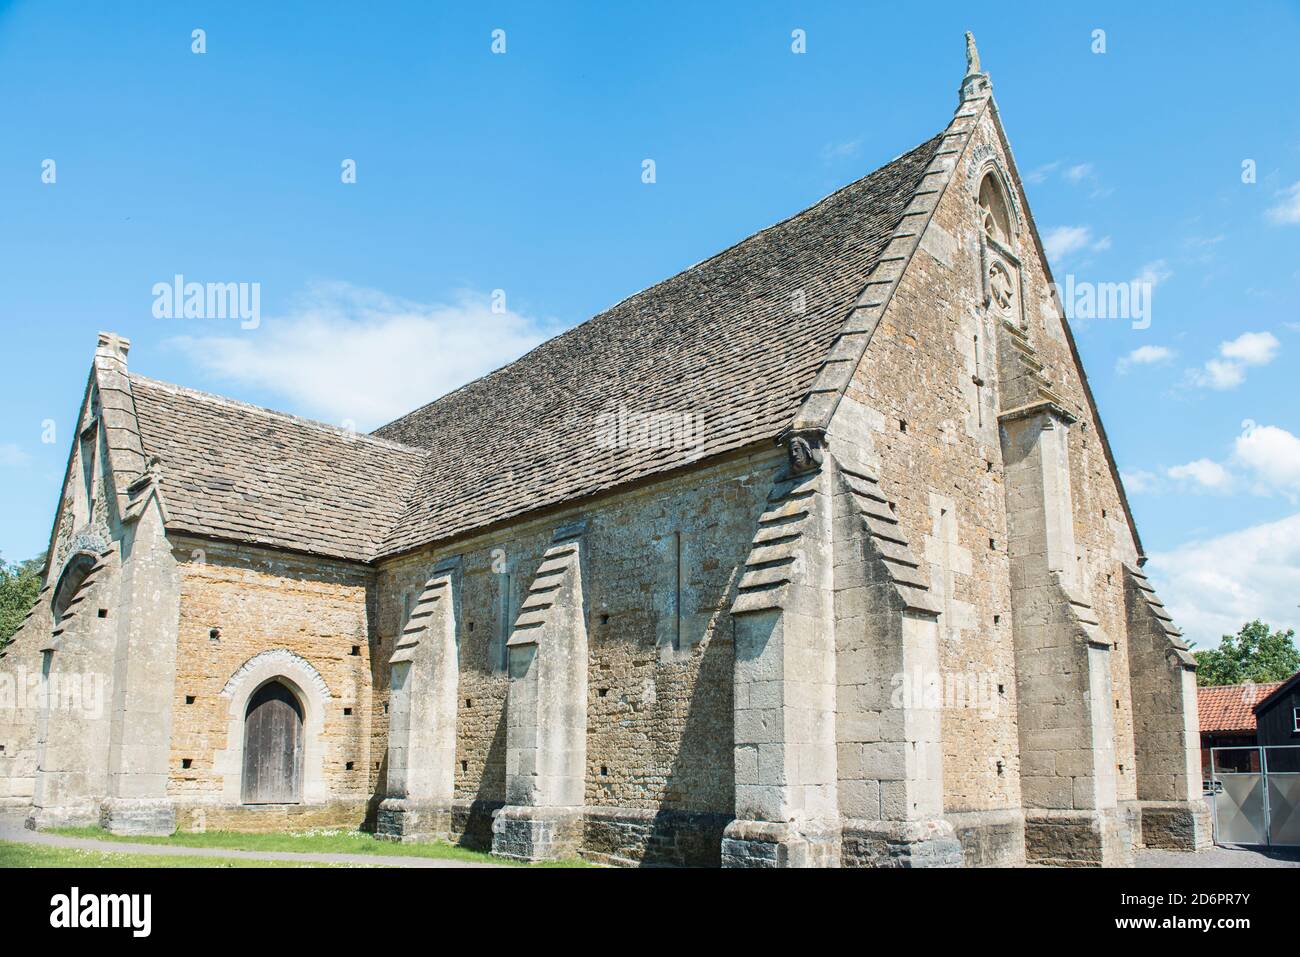 Old Tithe Stone Barn, Glastonbury, England. Somerset Rural Life Museum. Also known as the Abby Barn. Medieval Architecture. 14th century. Stock Photo